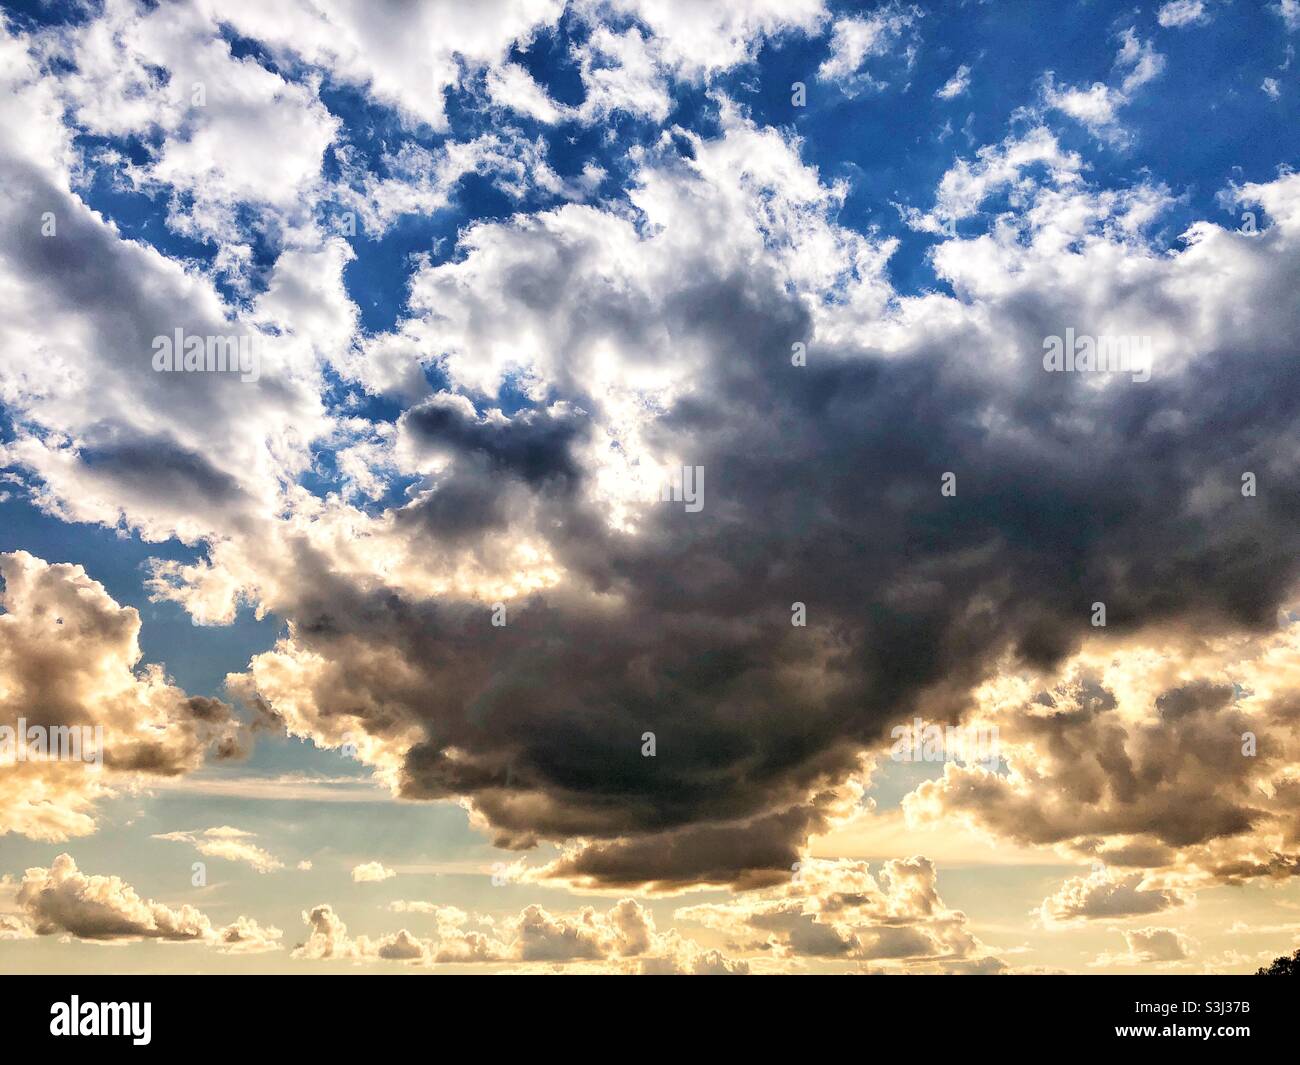 Ominous clouds filling the sky. Stock Photo